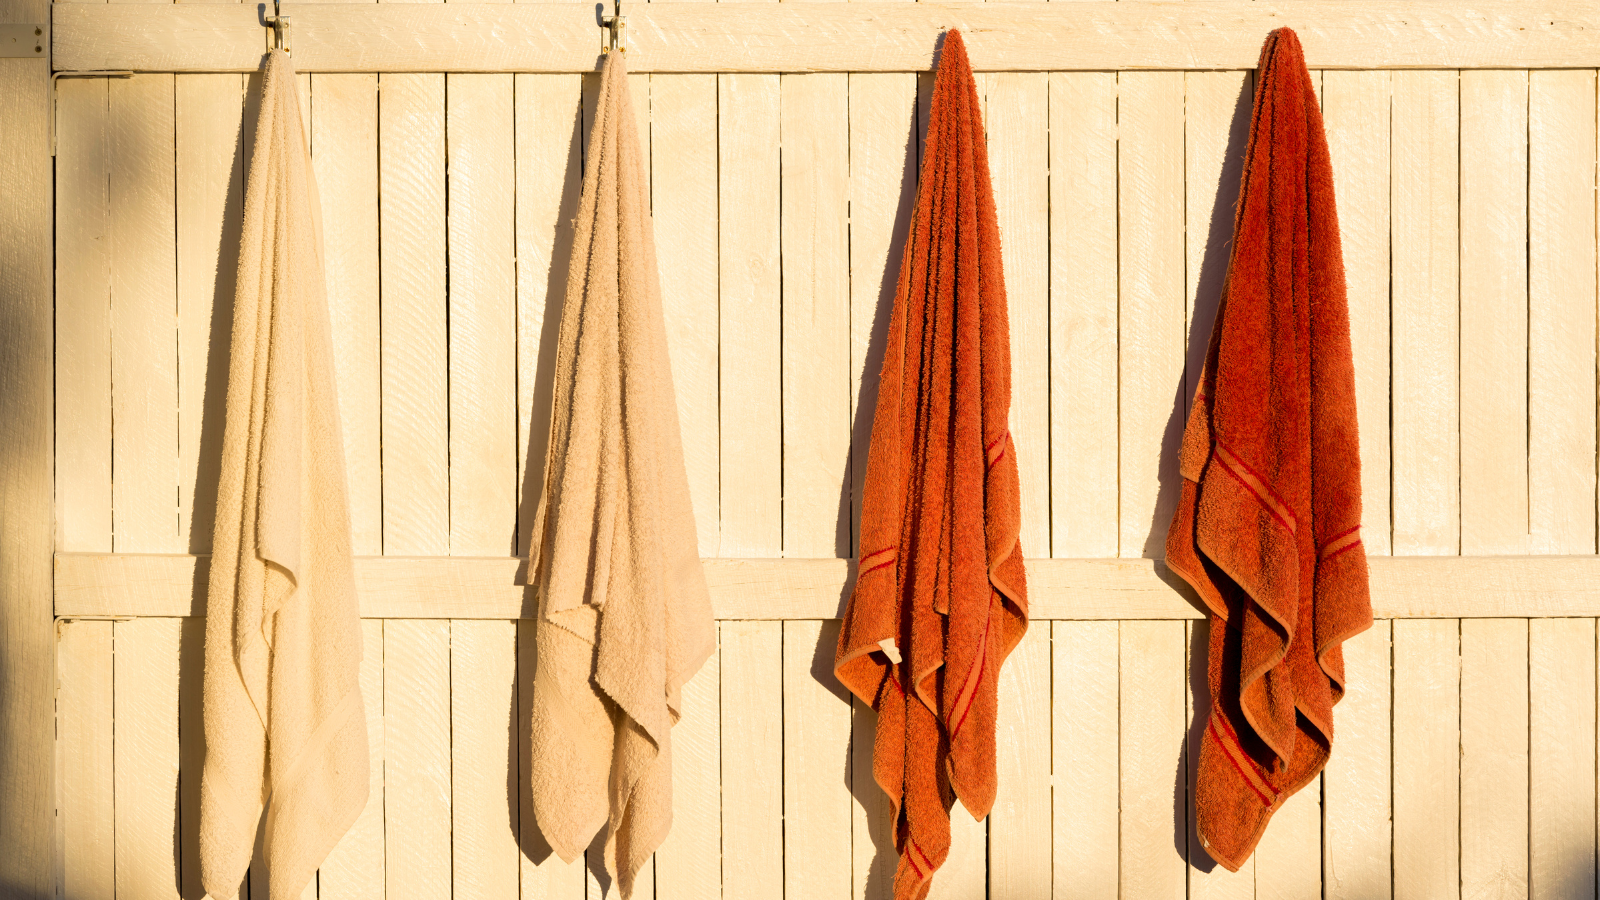 Towels Hanging Outdoors on Hook 